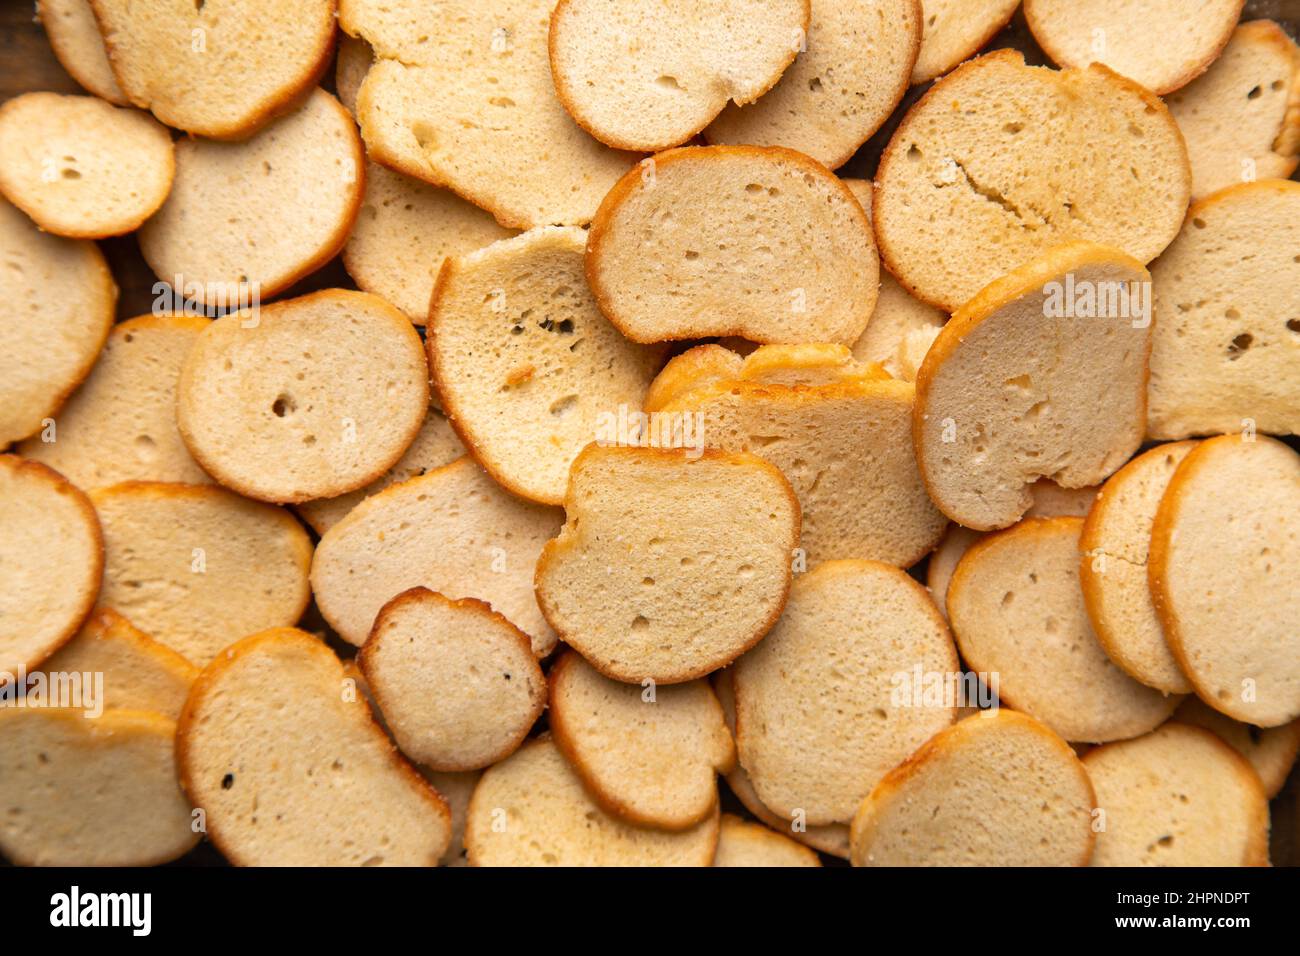 A closeup horizontal image of delicious golden toasted bagel chips. Stock Photo